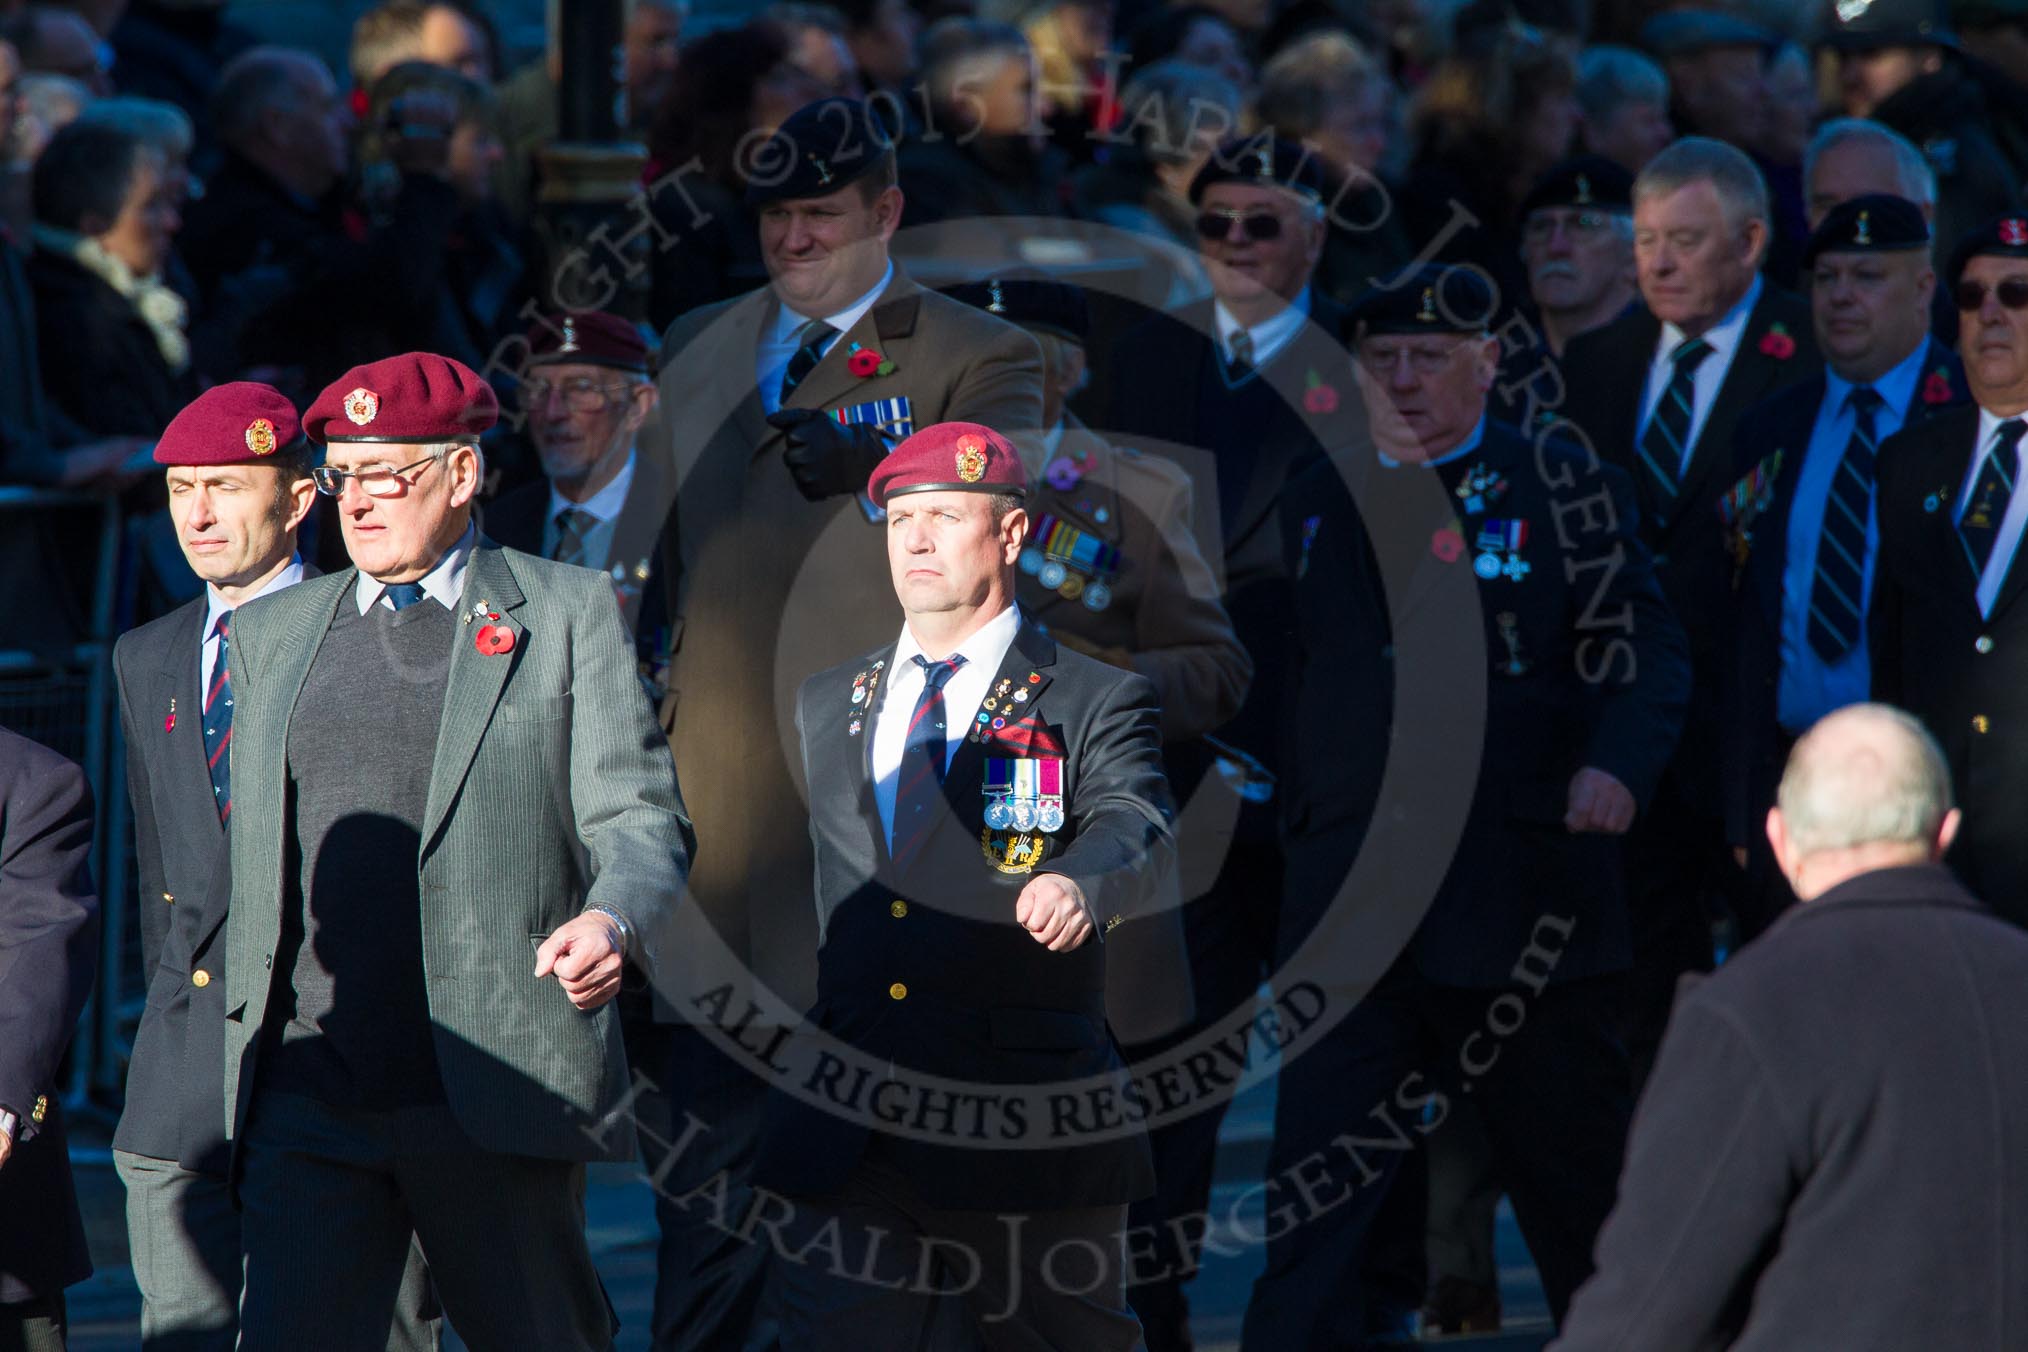 Remembrance Sunday Cenotaph March Past 2013: B22 - Airborne Engineers Association..
Press stand opposite the Foreign Office building, Whitehall, London SW1,
London,
Greater London,
United Kingdom,
on 10 November 2013 at 12:02, image #1490